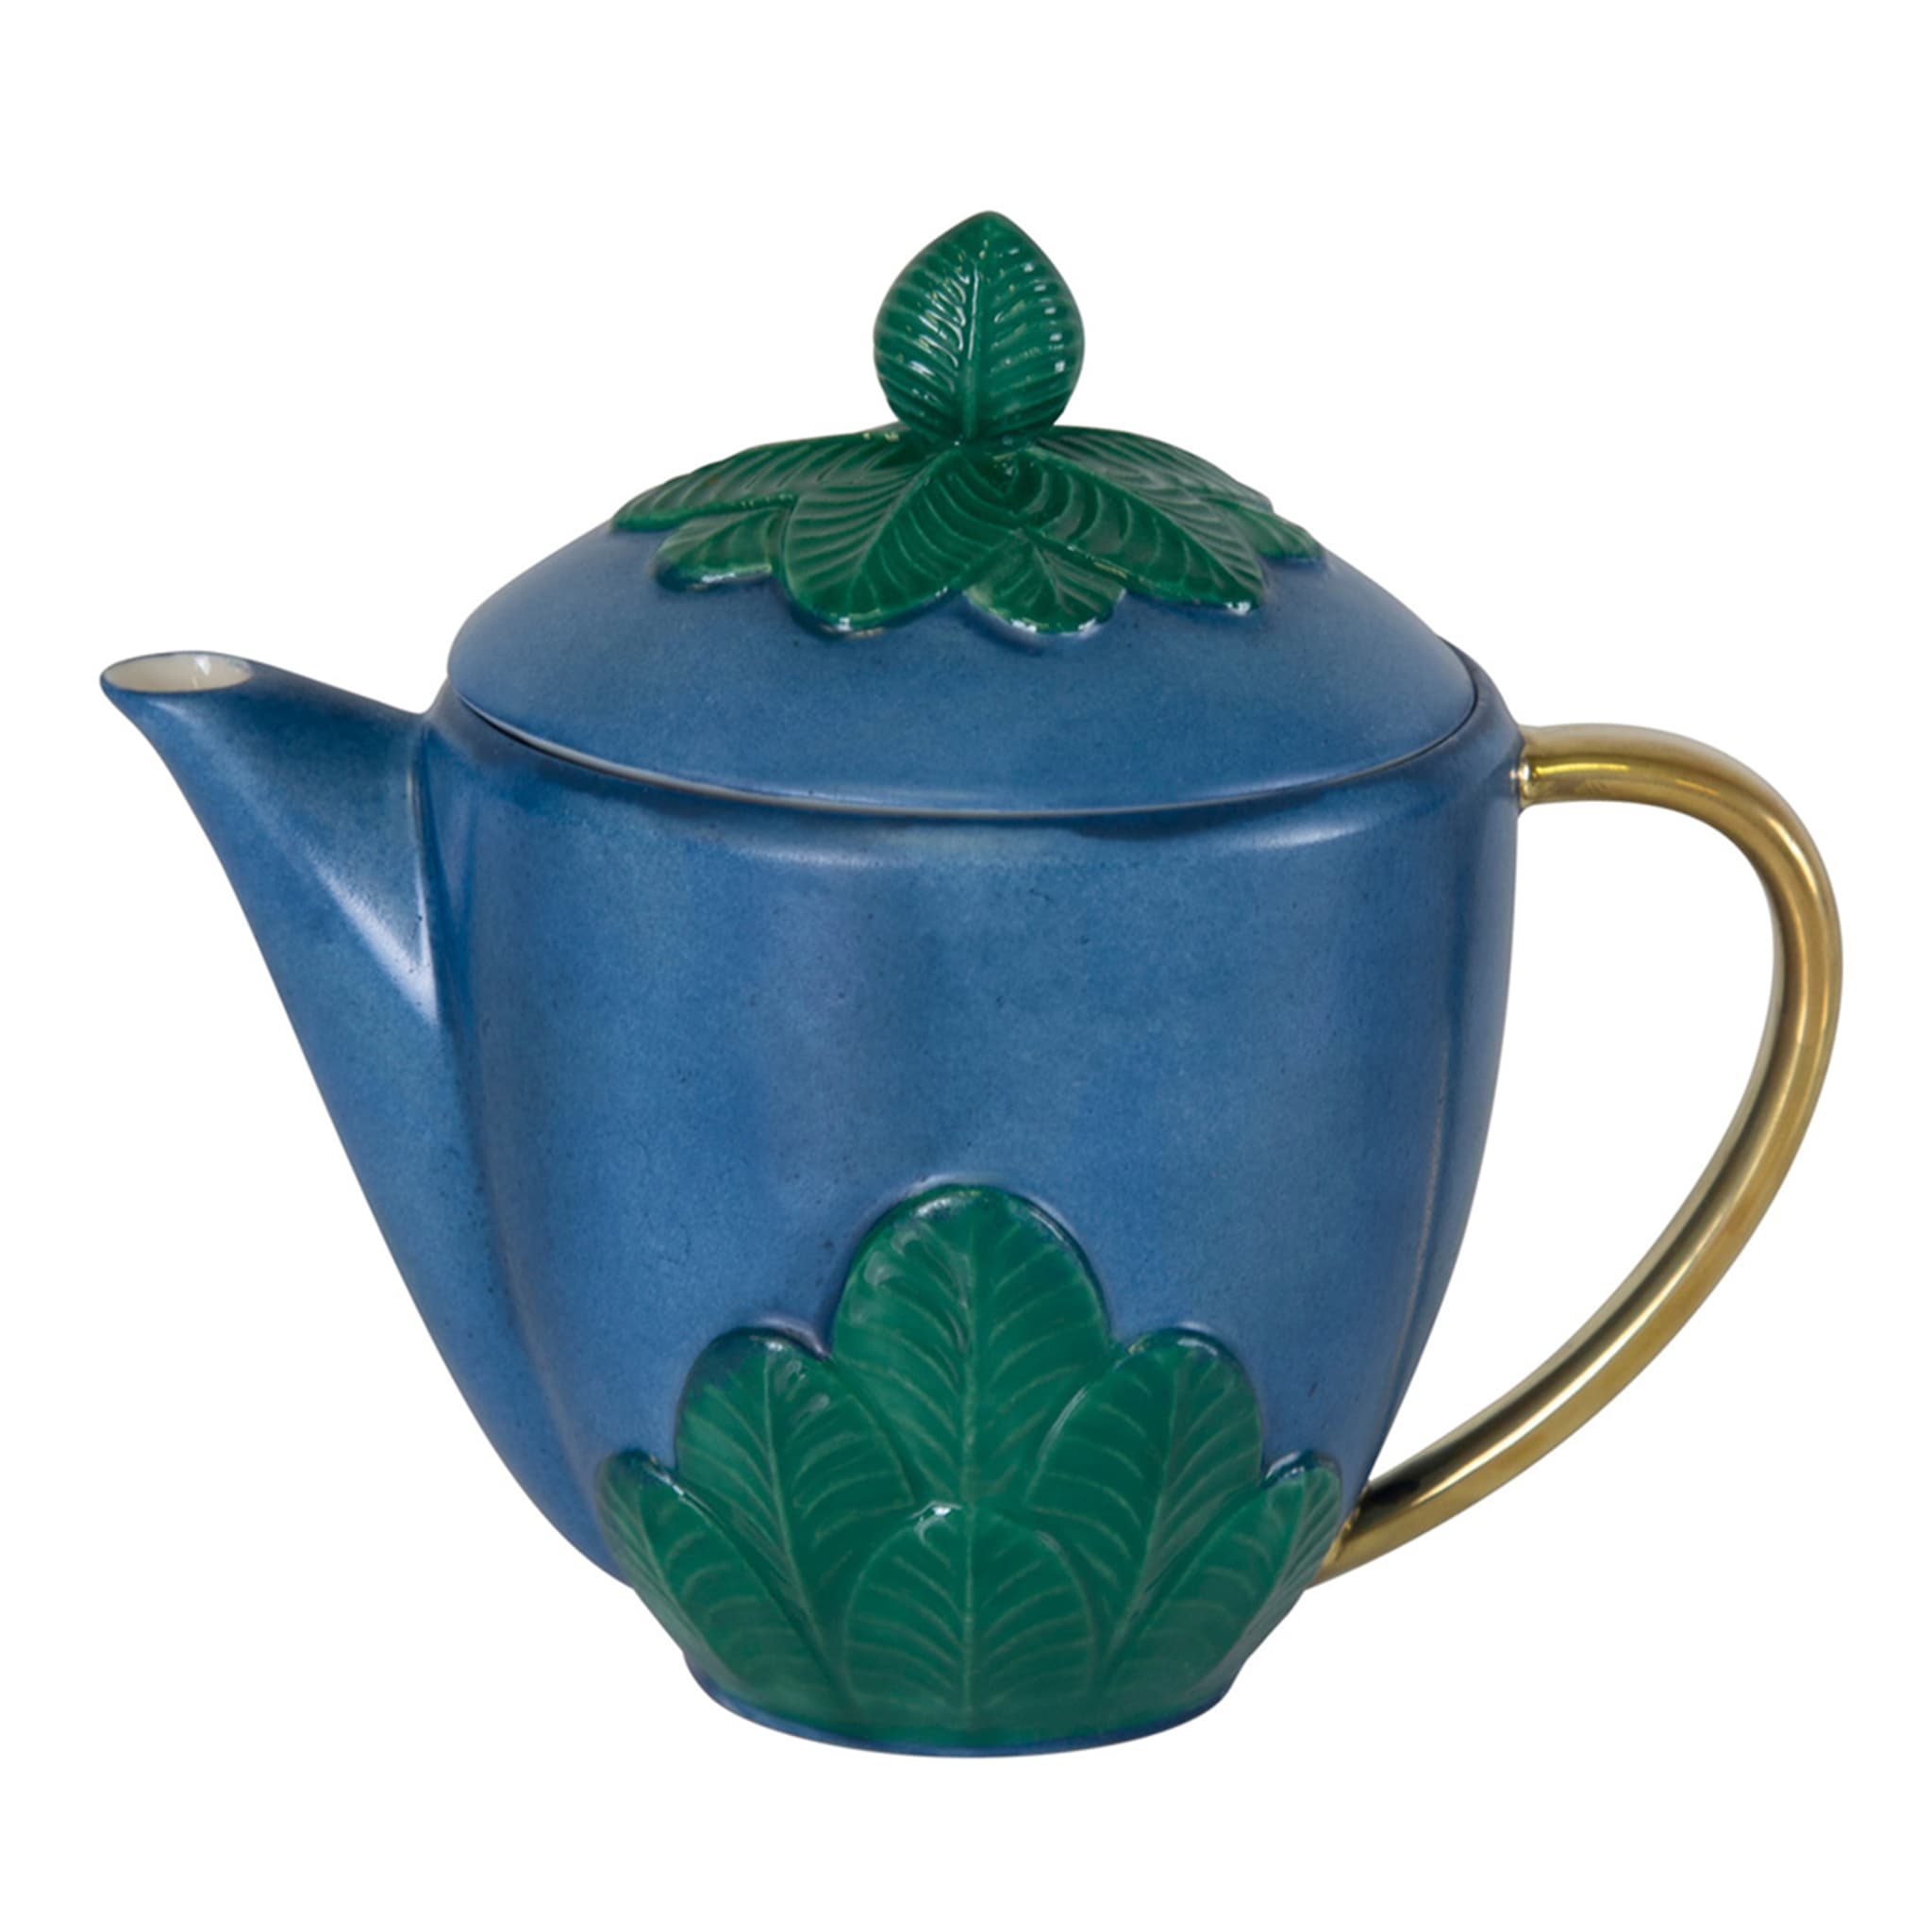 PEACOCK CREAMER - BLUE AND GOLD - Main view